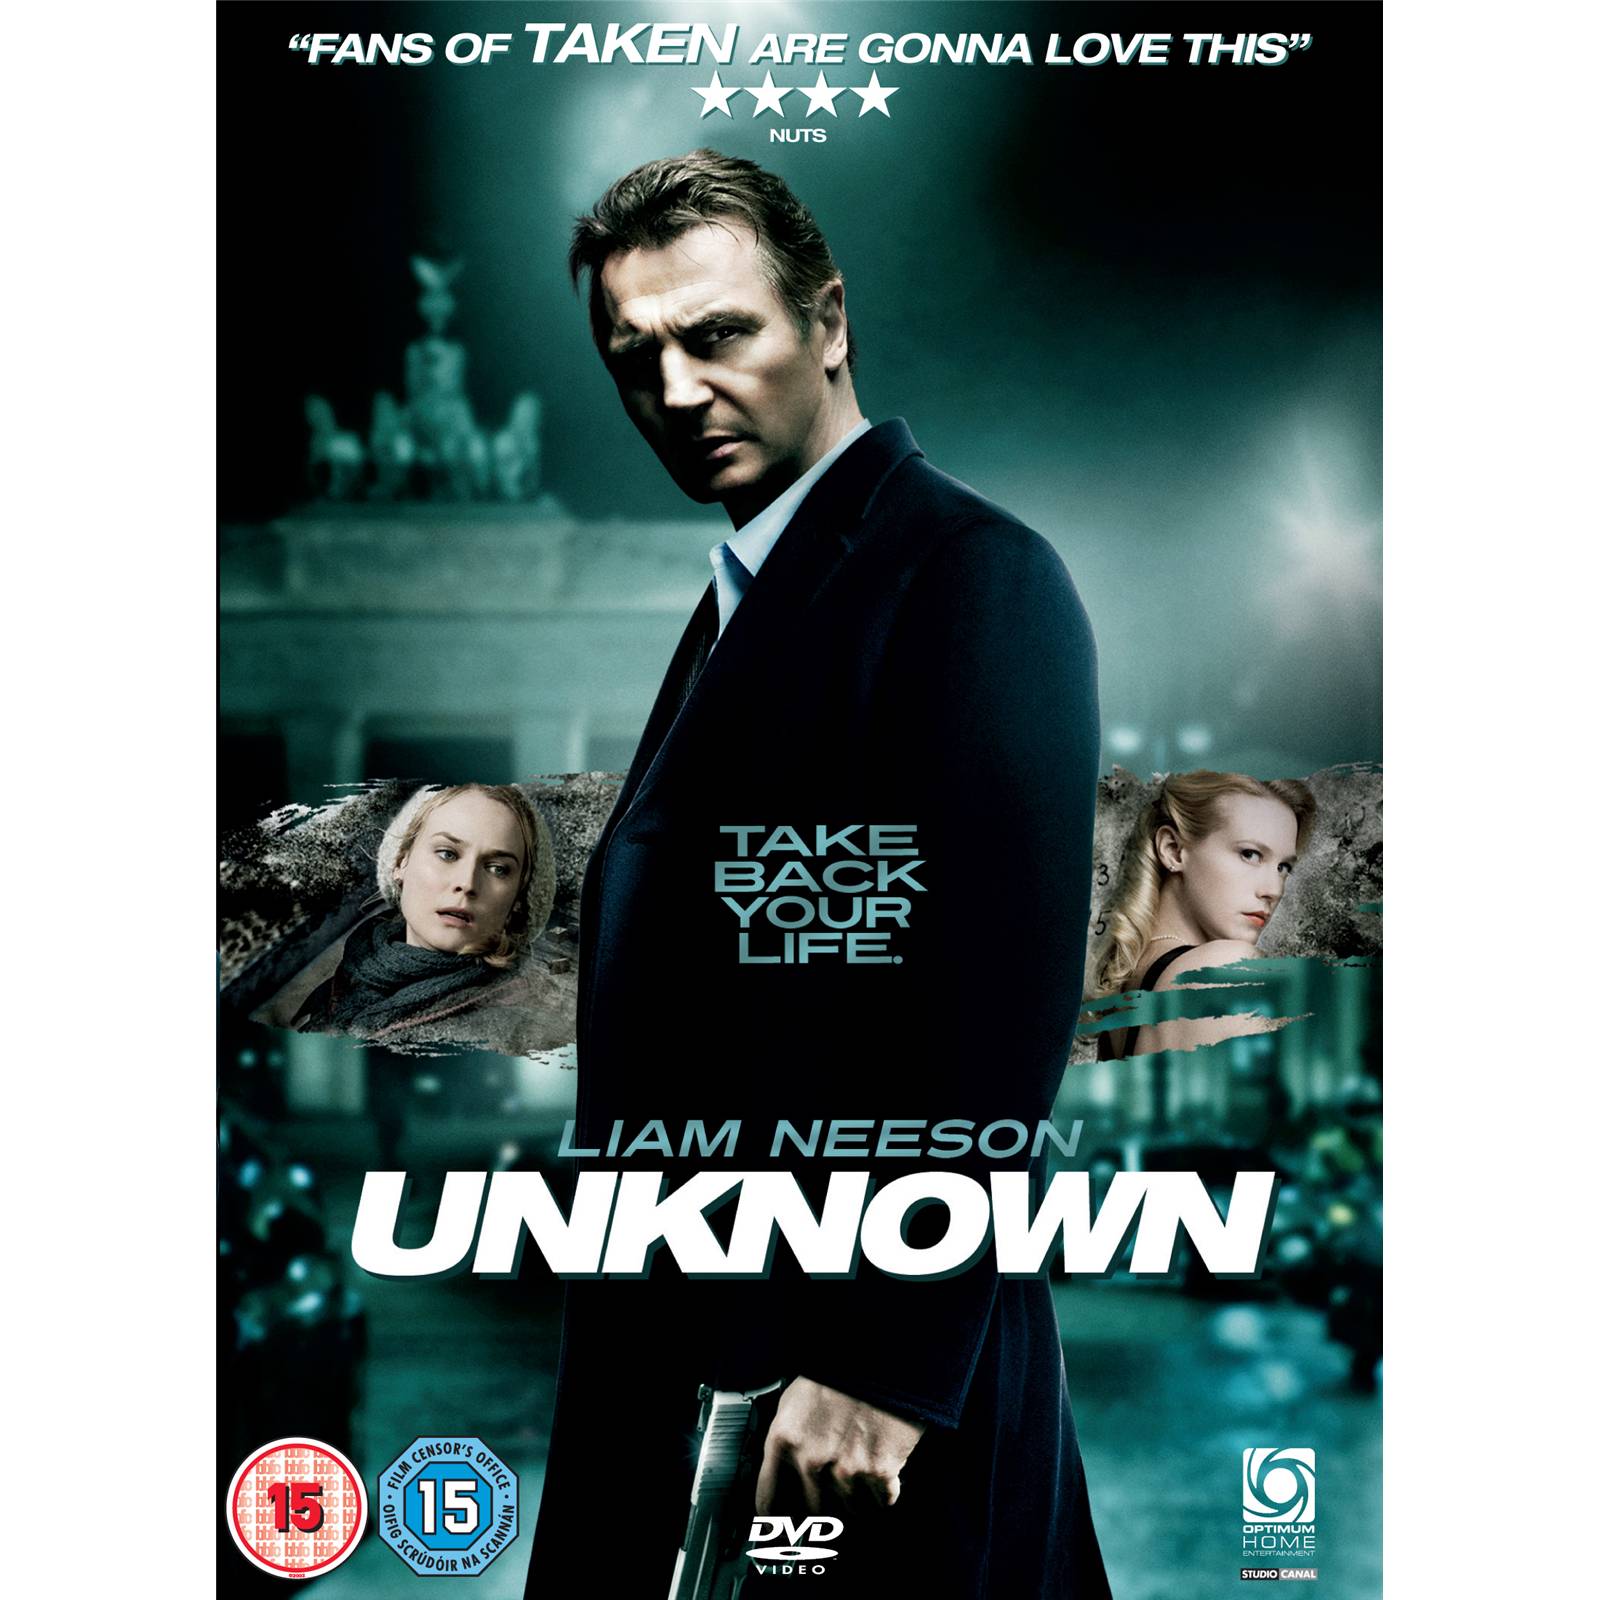 Play.com - Buy Unknown online at Play.com and read reviews. Free ...